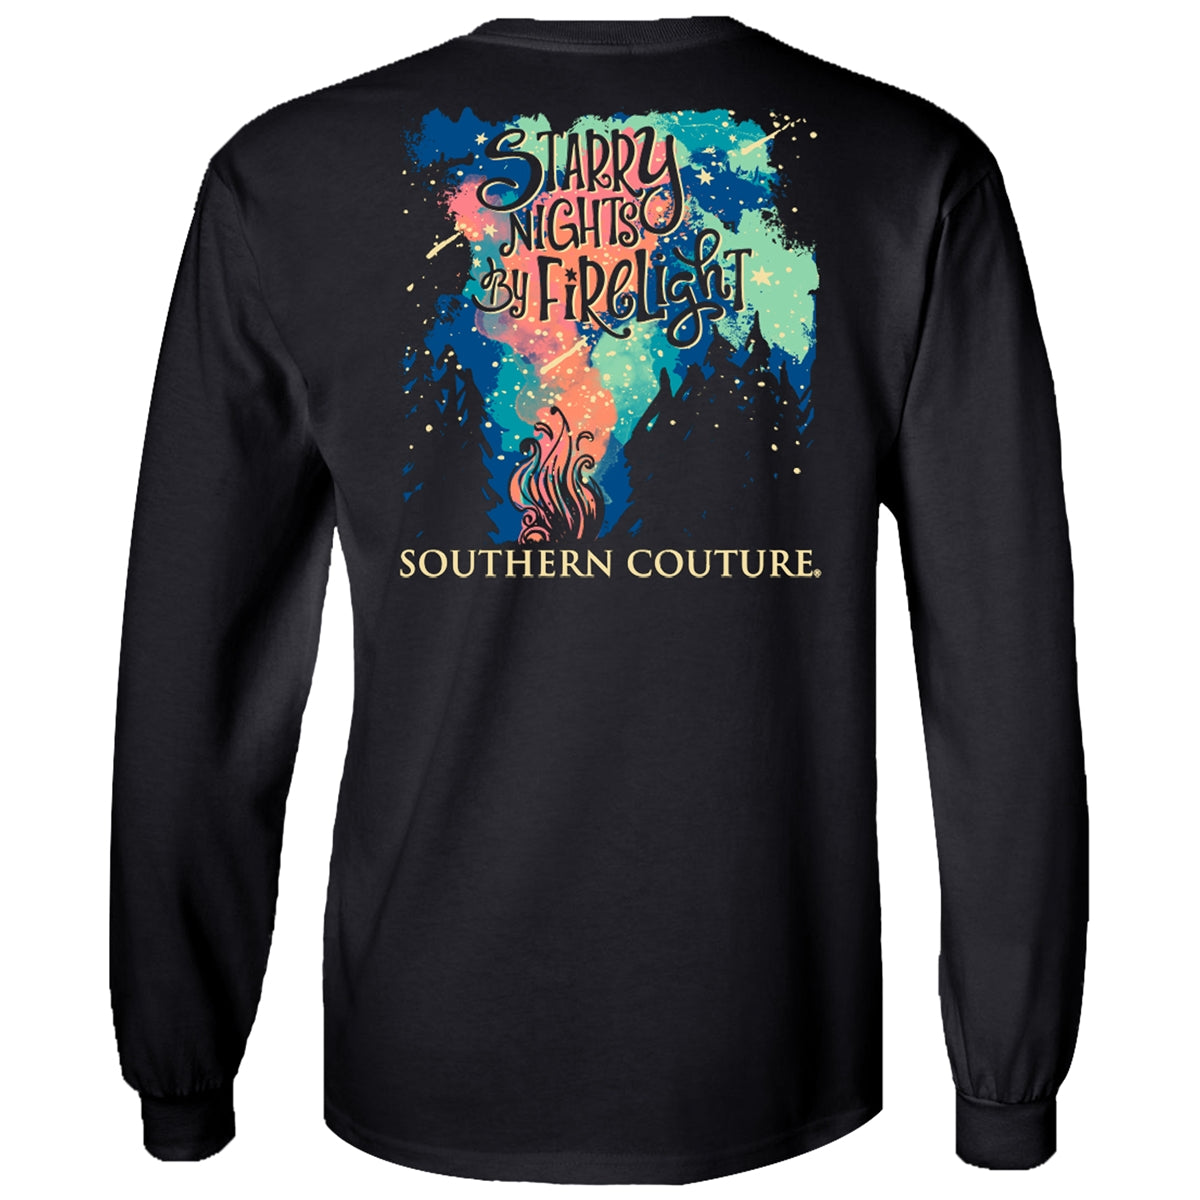 Southern Couture Classic Starry Nights by Firelight Long Sleeve T-Shirt